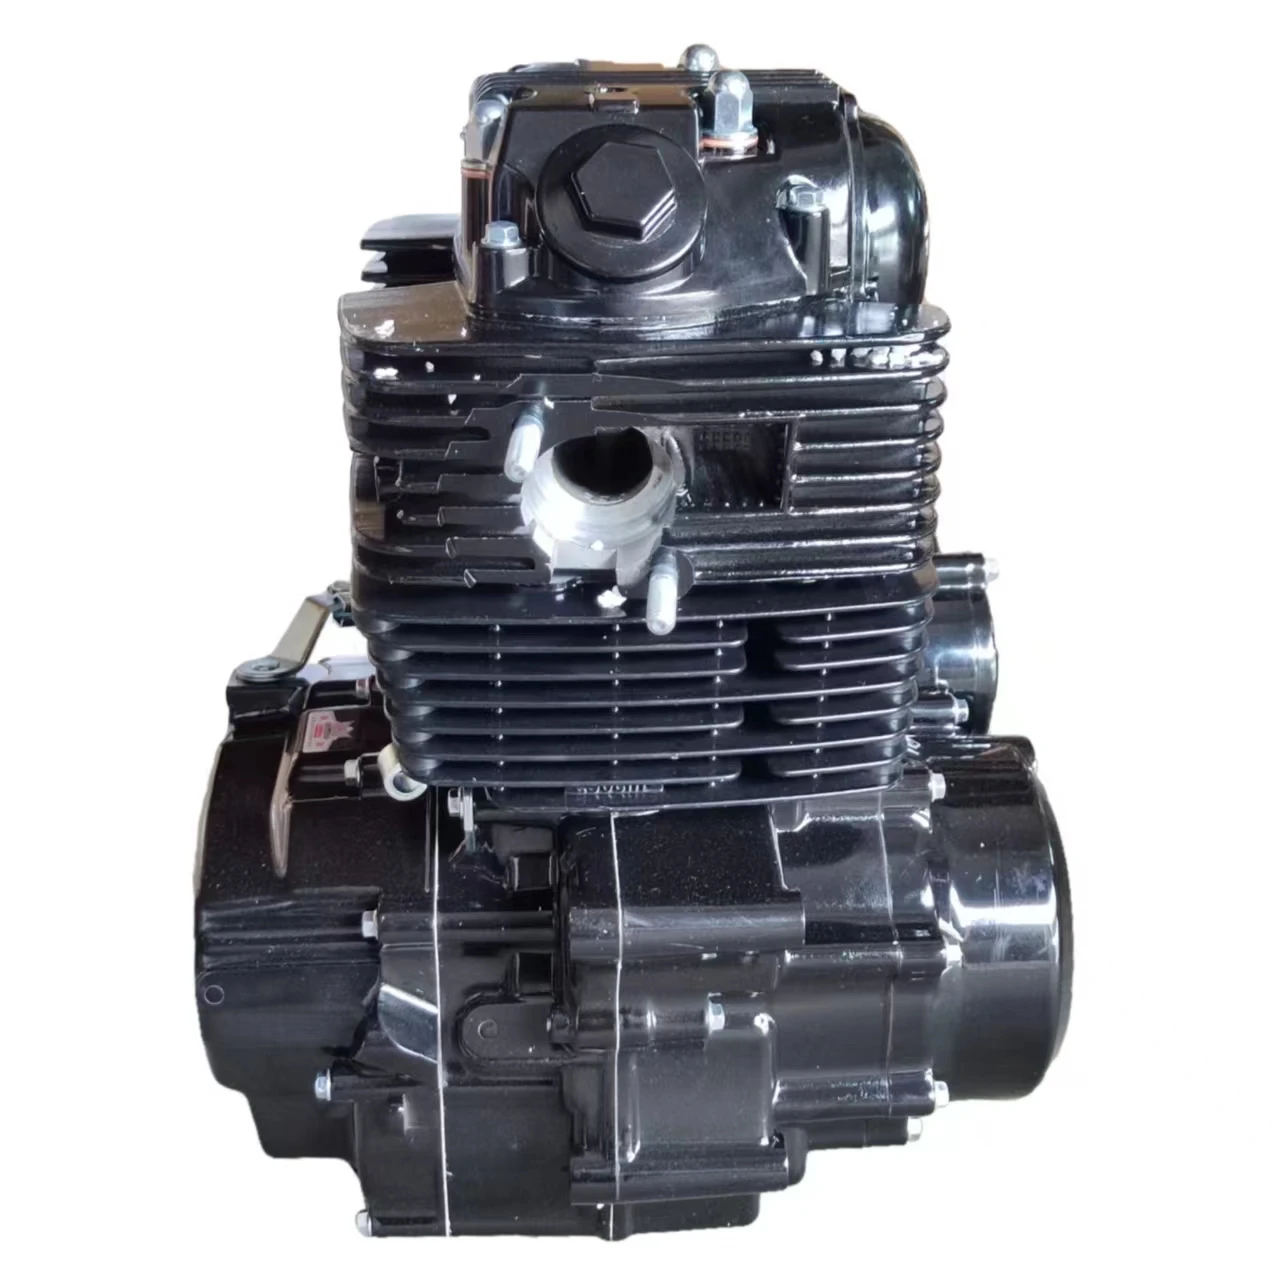 OEM Zongshen CB250cc engine air cooled motorcycle 250cc engine 4 stroke 5 speed three wheel motorcycle cargo agricultural